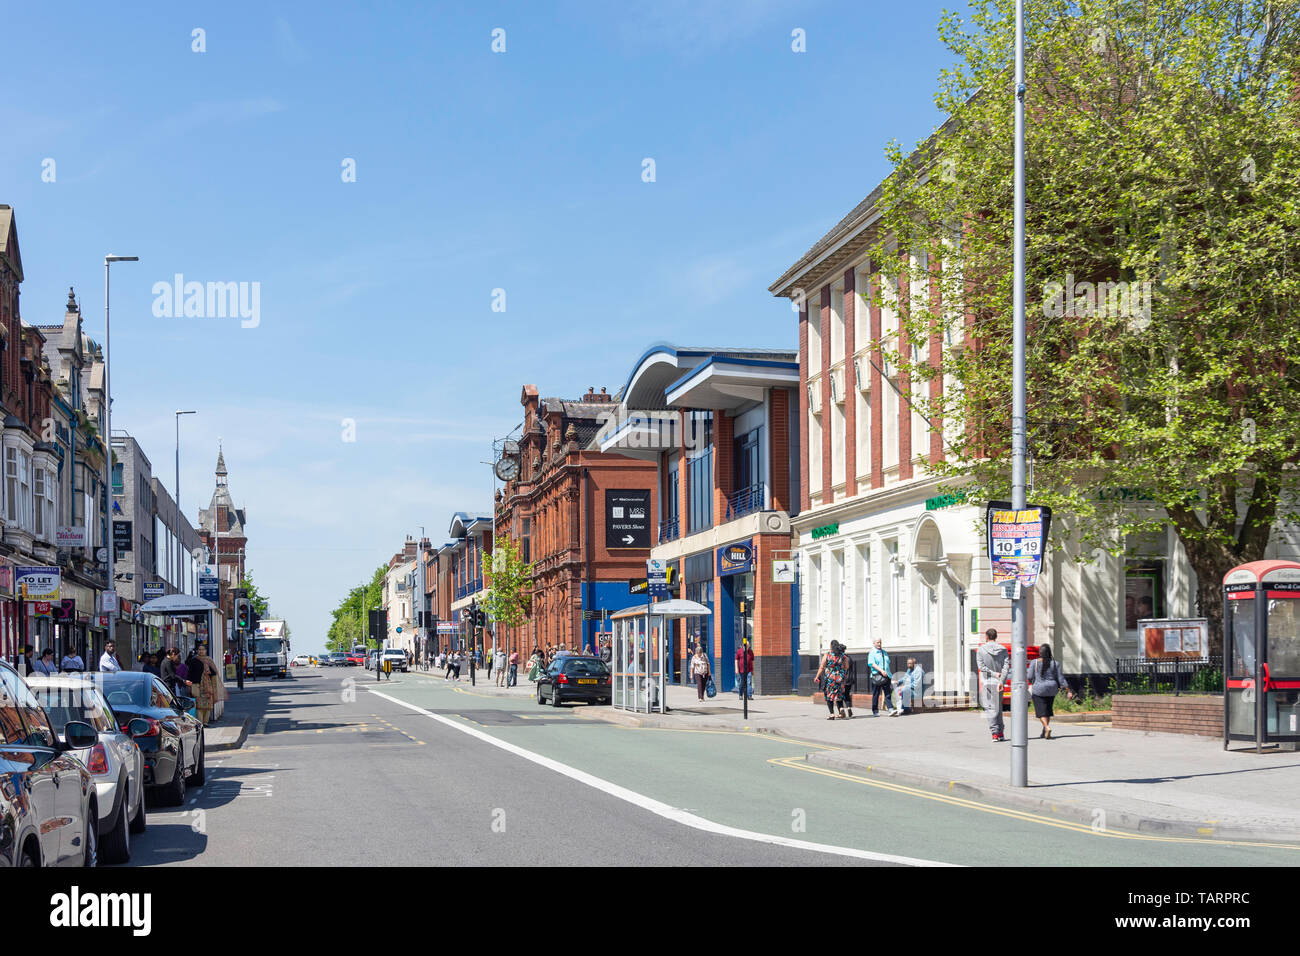 High Street, West Bromwich, West Midlands, England, Regno Unito Foto Stock